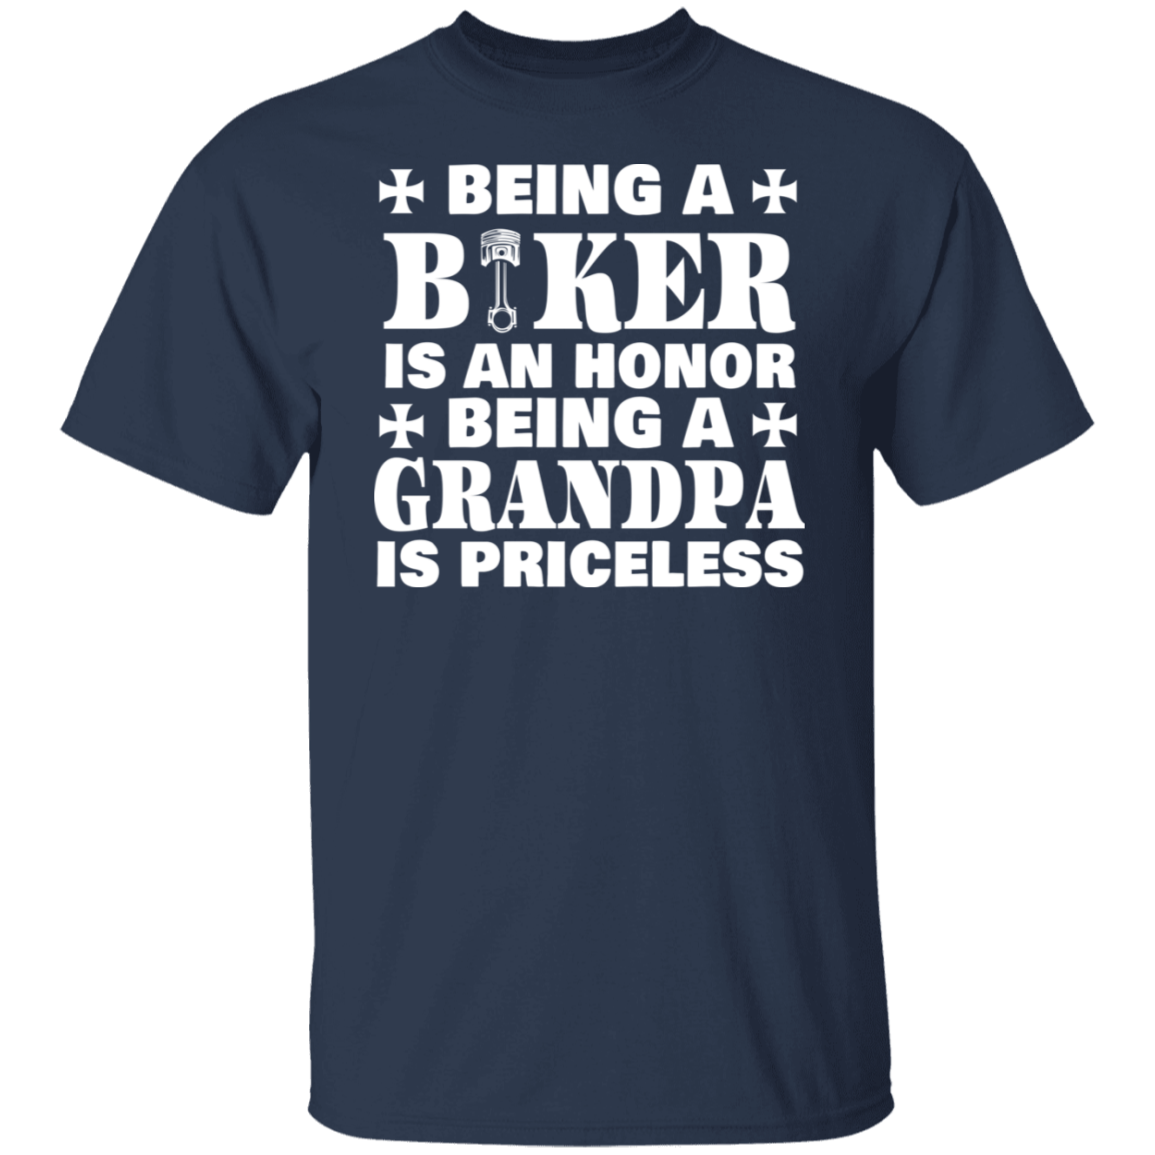 Being a grandpa is priceless Shirt